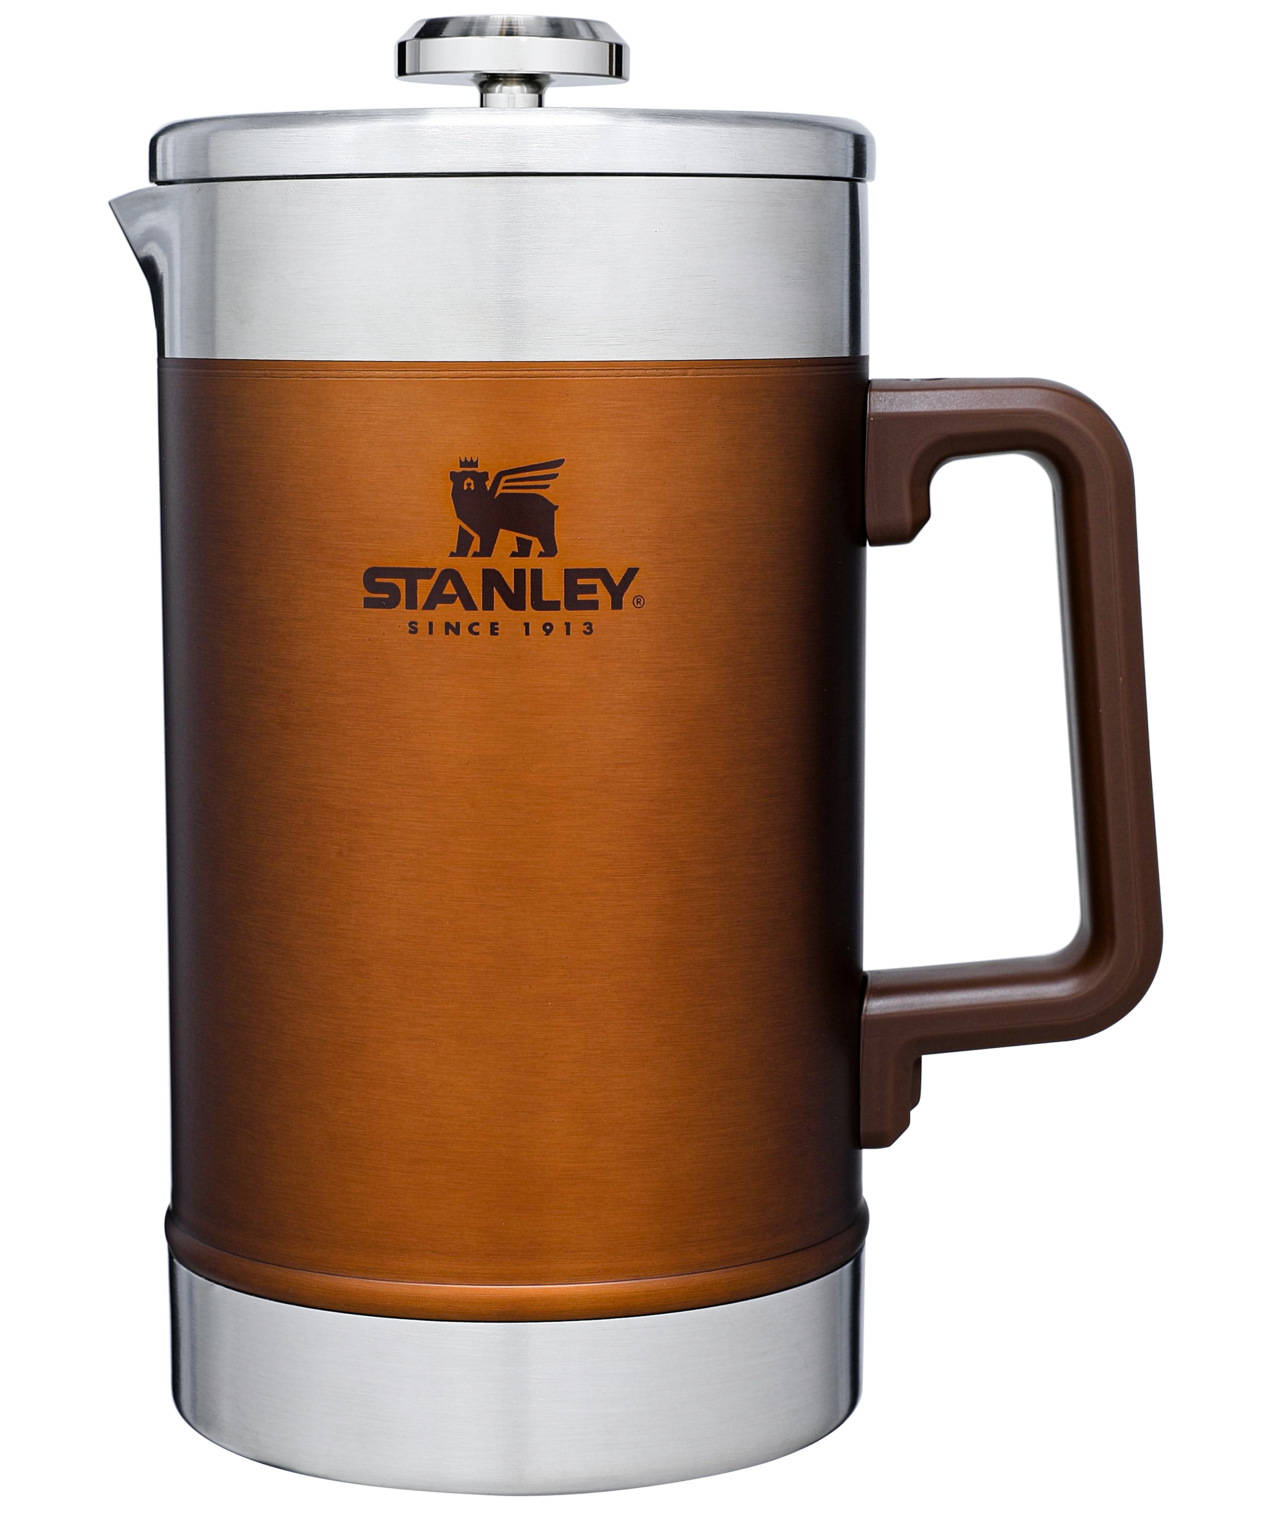 https://cs1.0ps.us/original/opplanet-stanley-the-stay-hot-french-press-48oz-maple-48-oz-10-02888-041-main